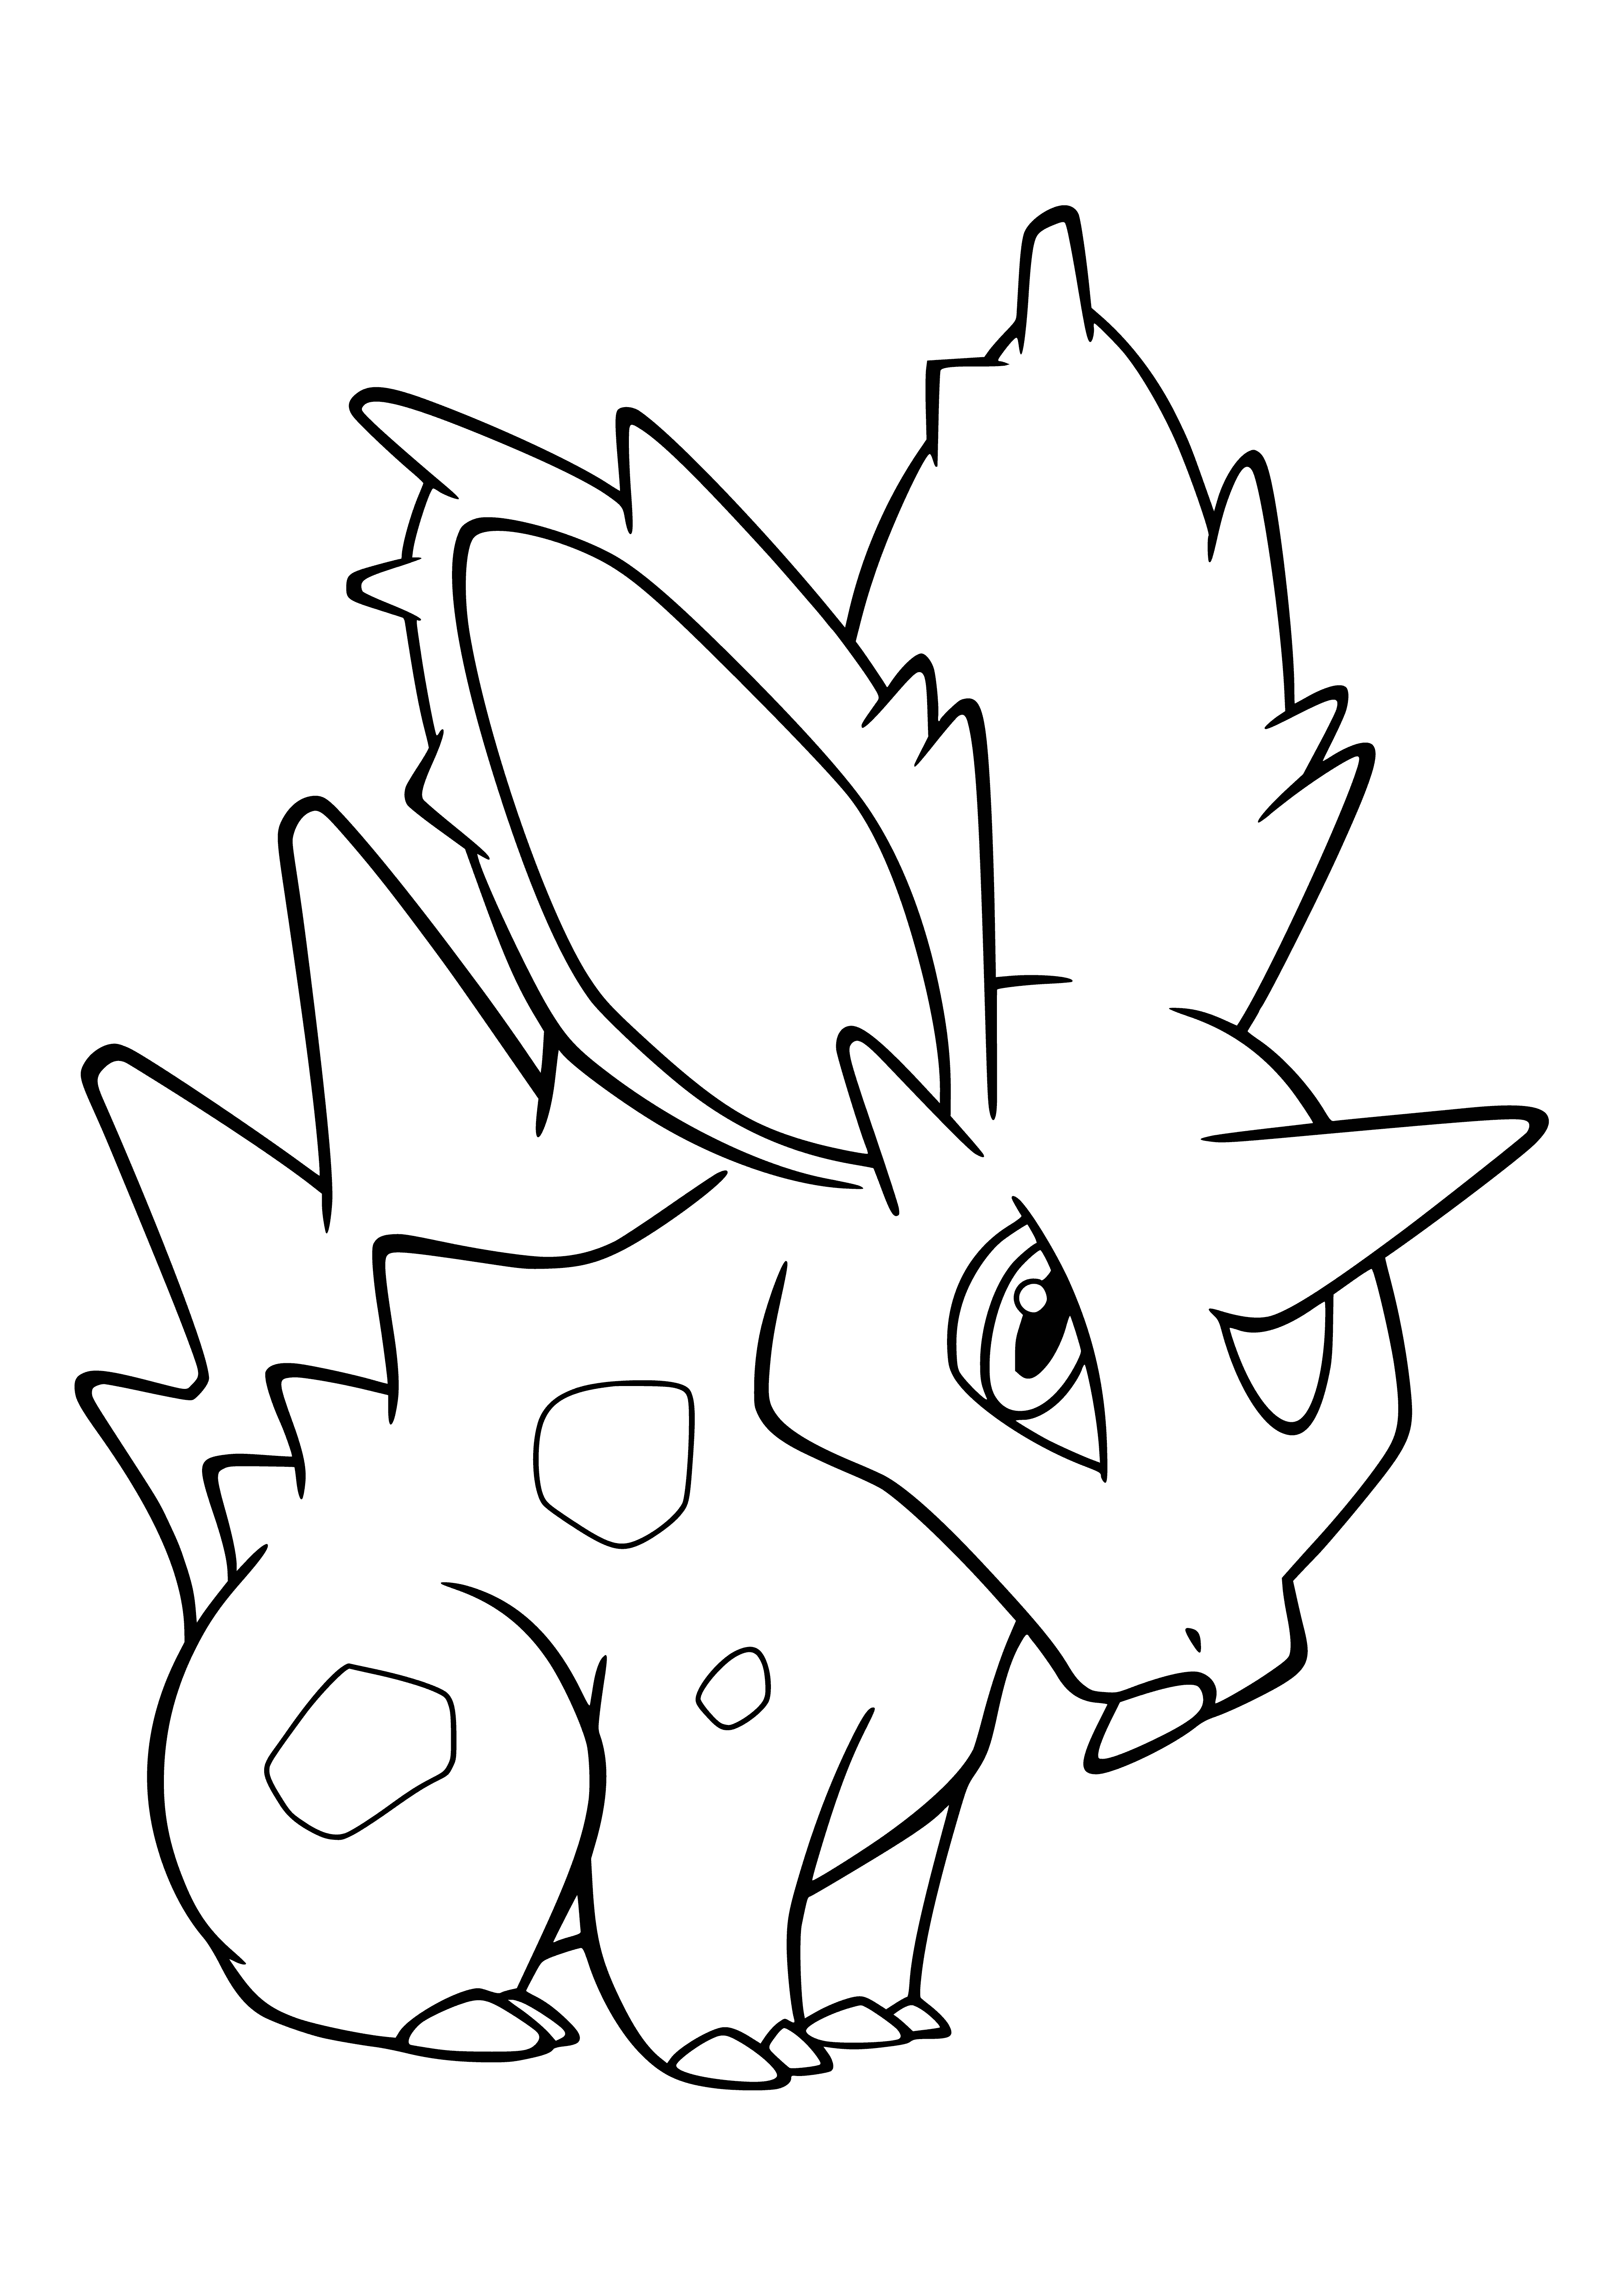 coloring page: Small, rodent-like Pokemon w/ blue body, white spots, large ears, two horns, poisonous spike on back. #Pokemon #Nidoran